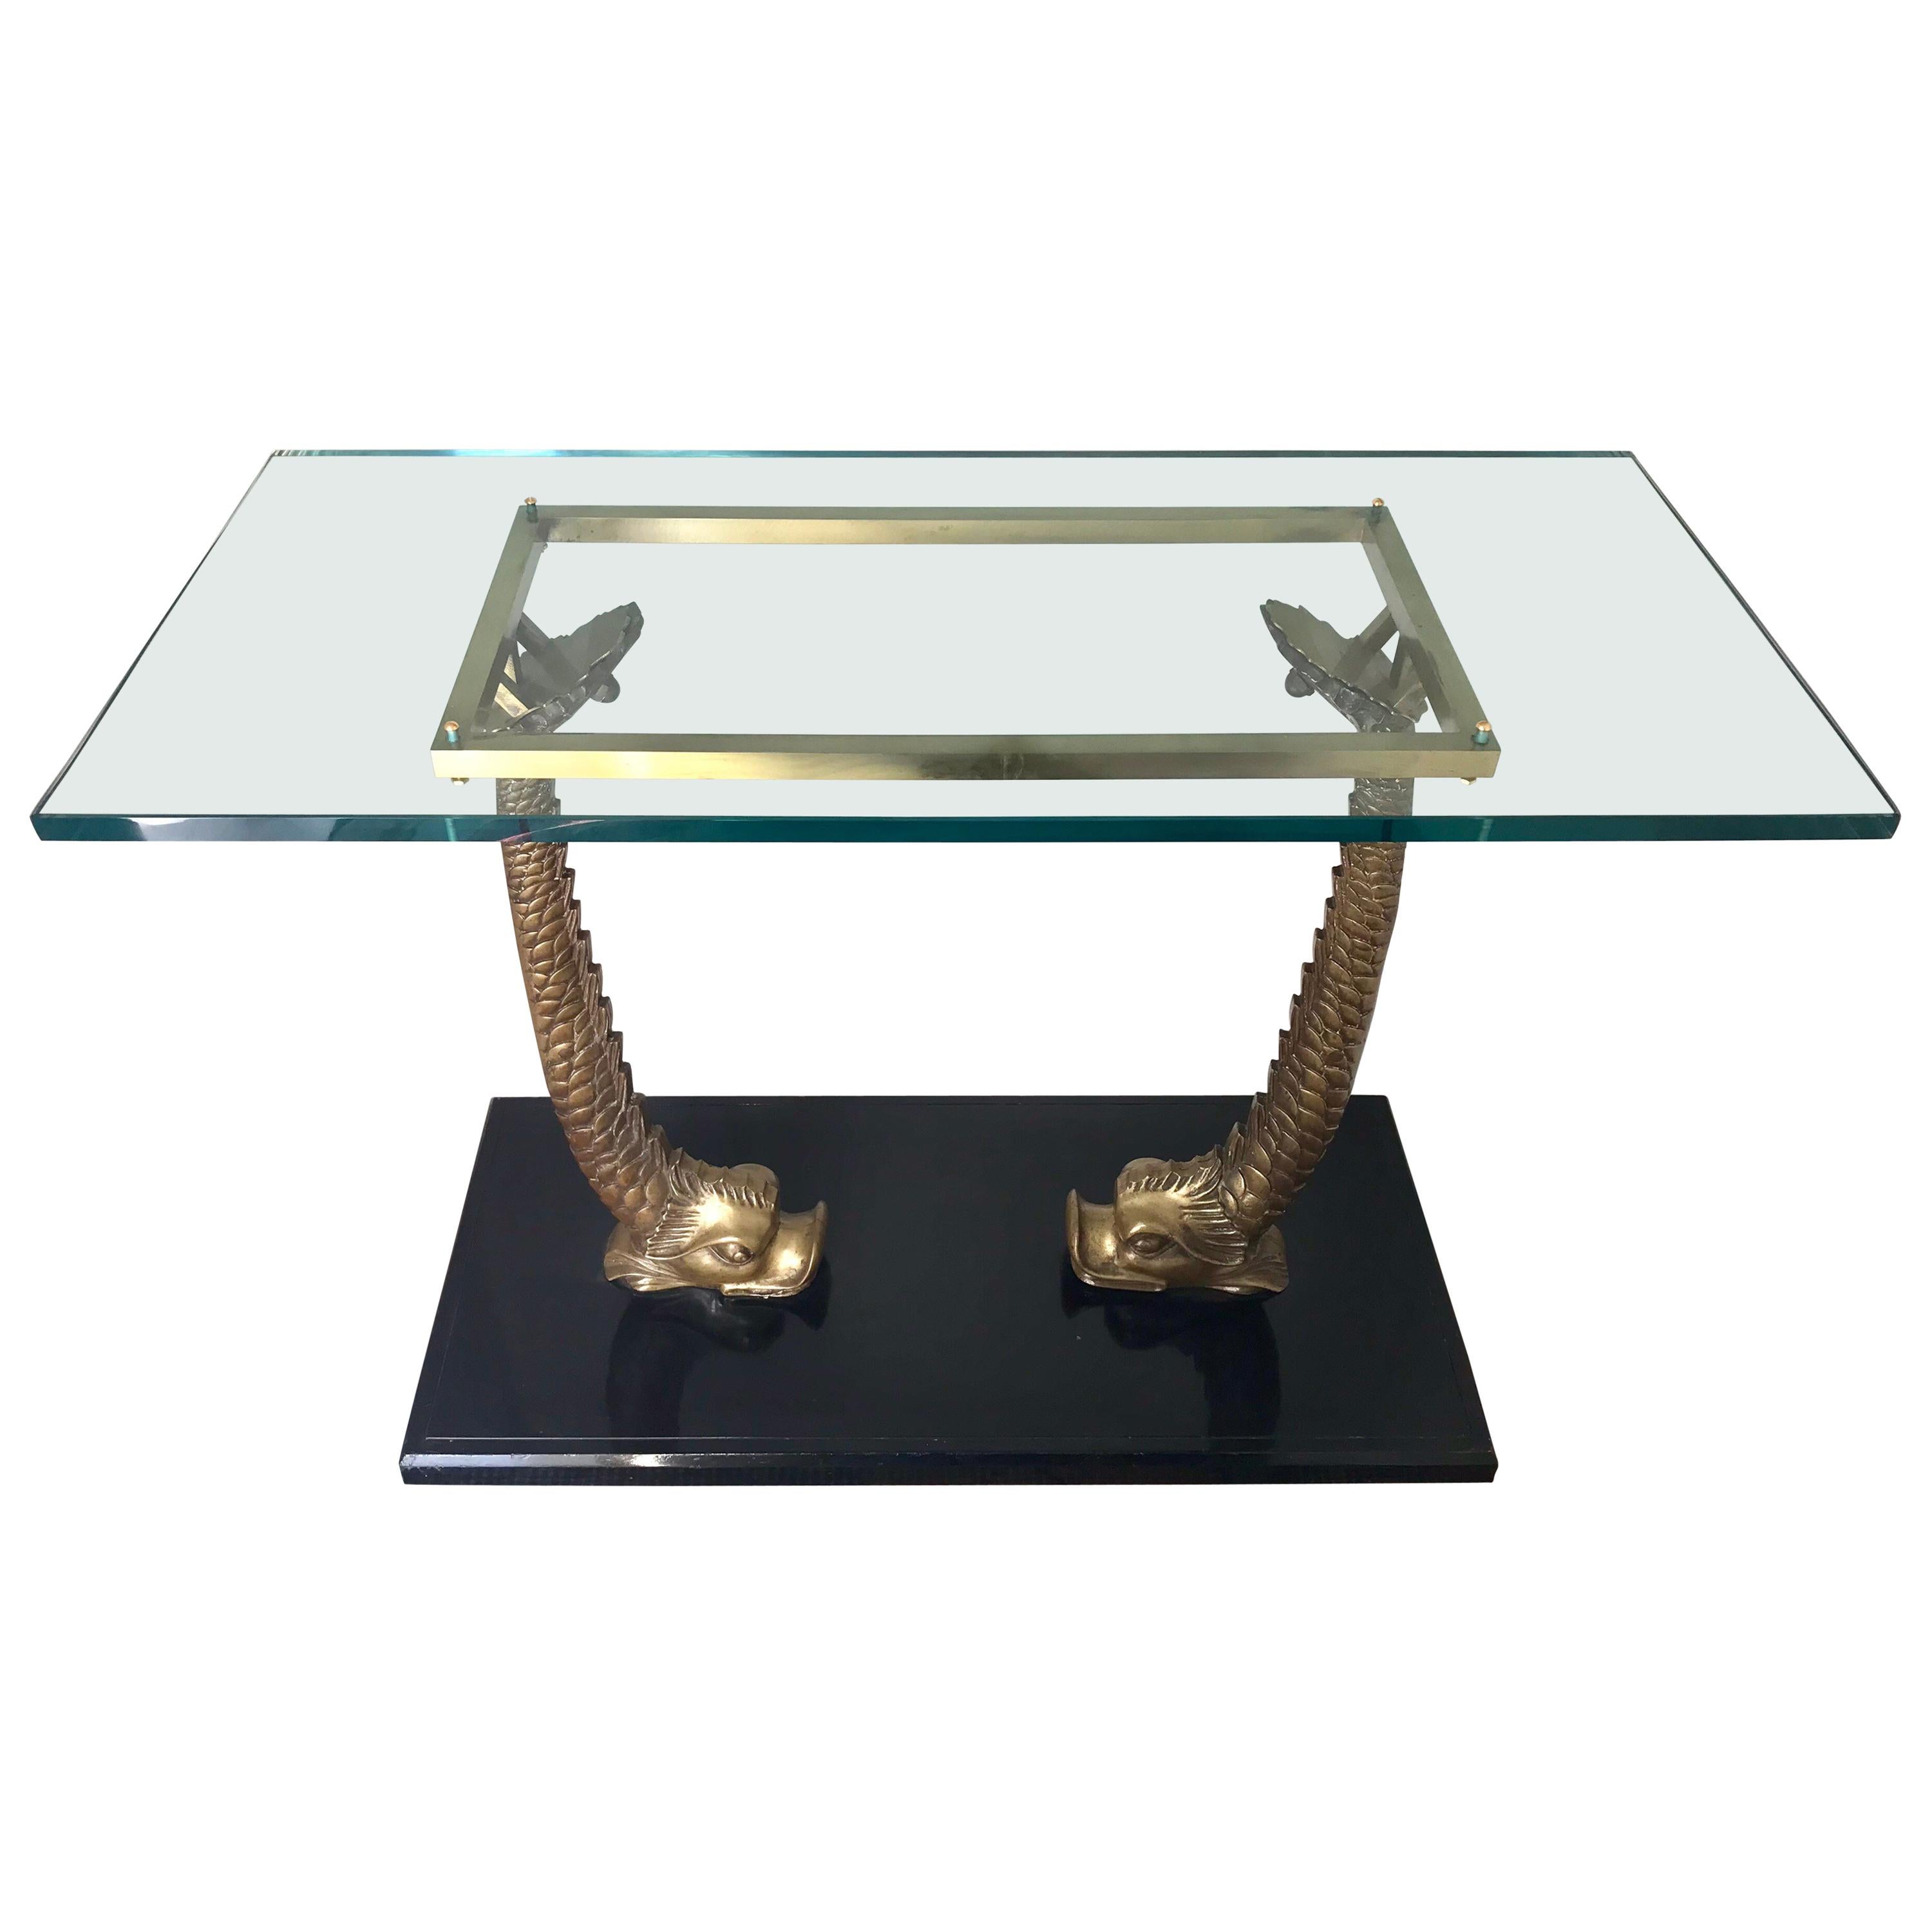 Brass Sculptural Koi Fish and Glass Console Table Made in Italy